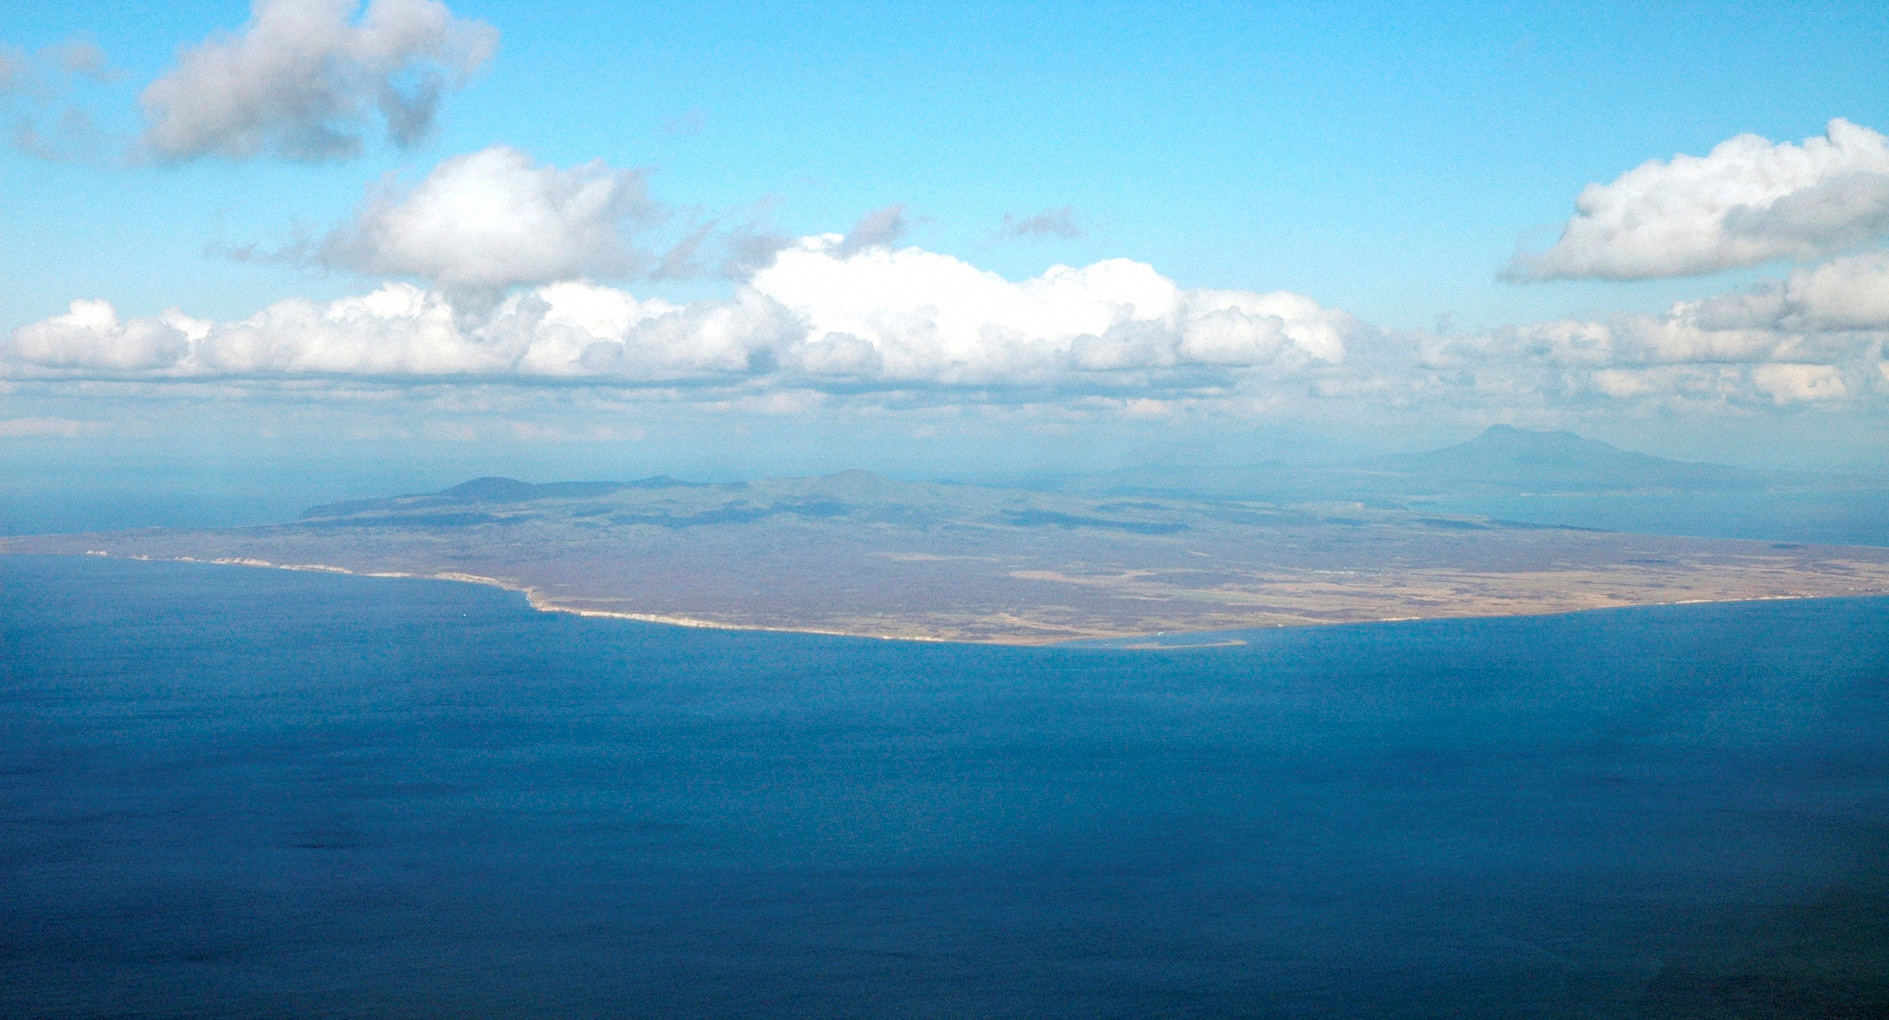 Kunashiri Island, one of four islands known as the Southern Kuriles in Russia and Northern Territories in Japan, is seen in this photo taken 2005.